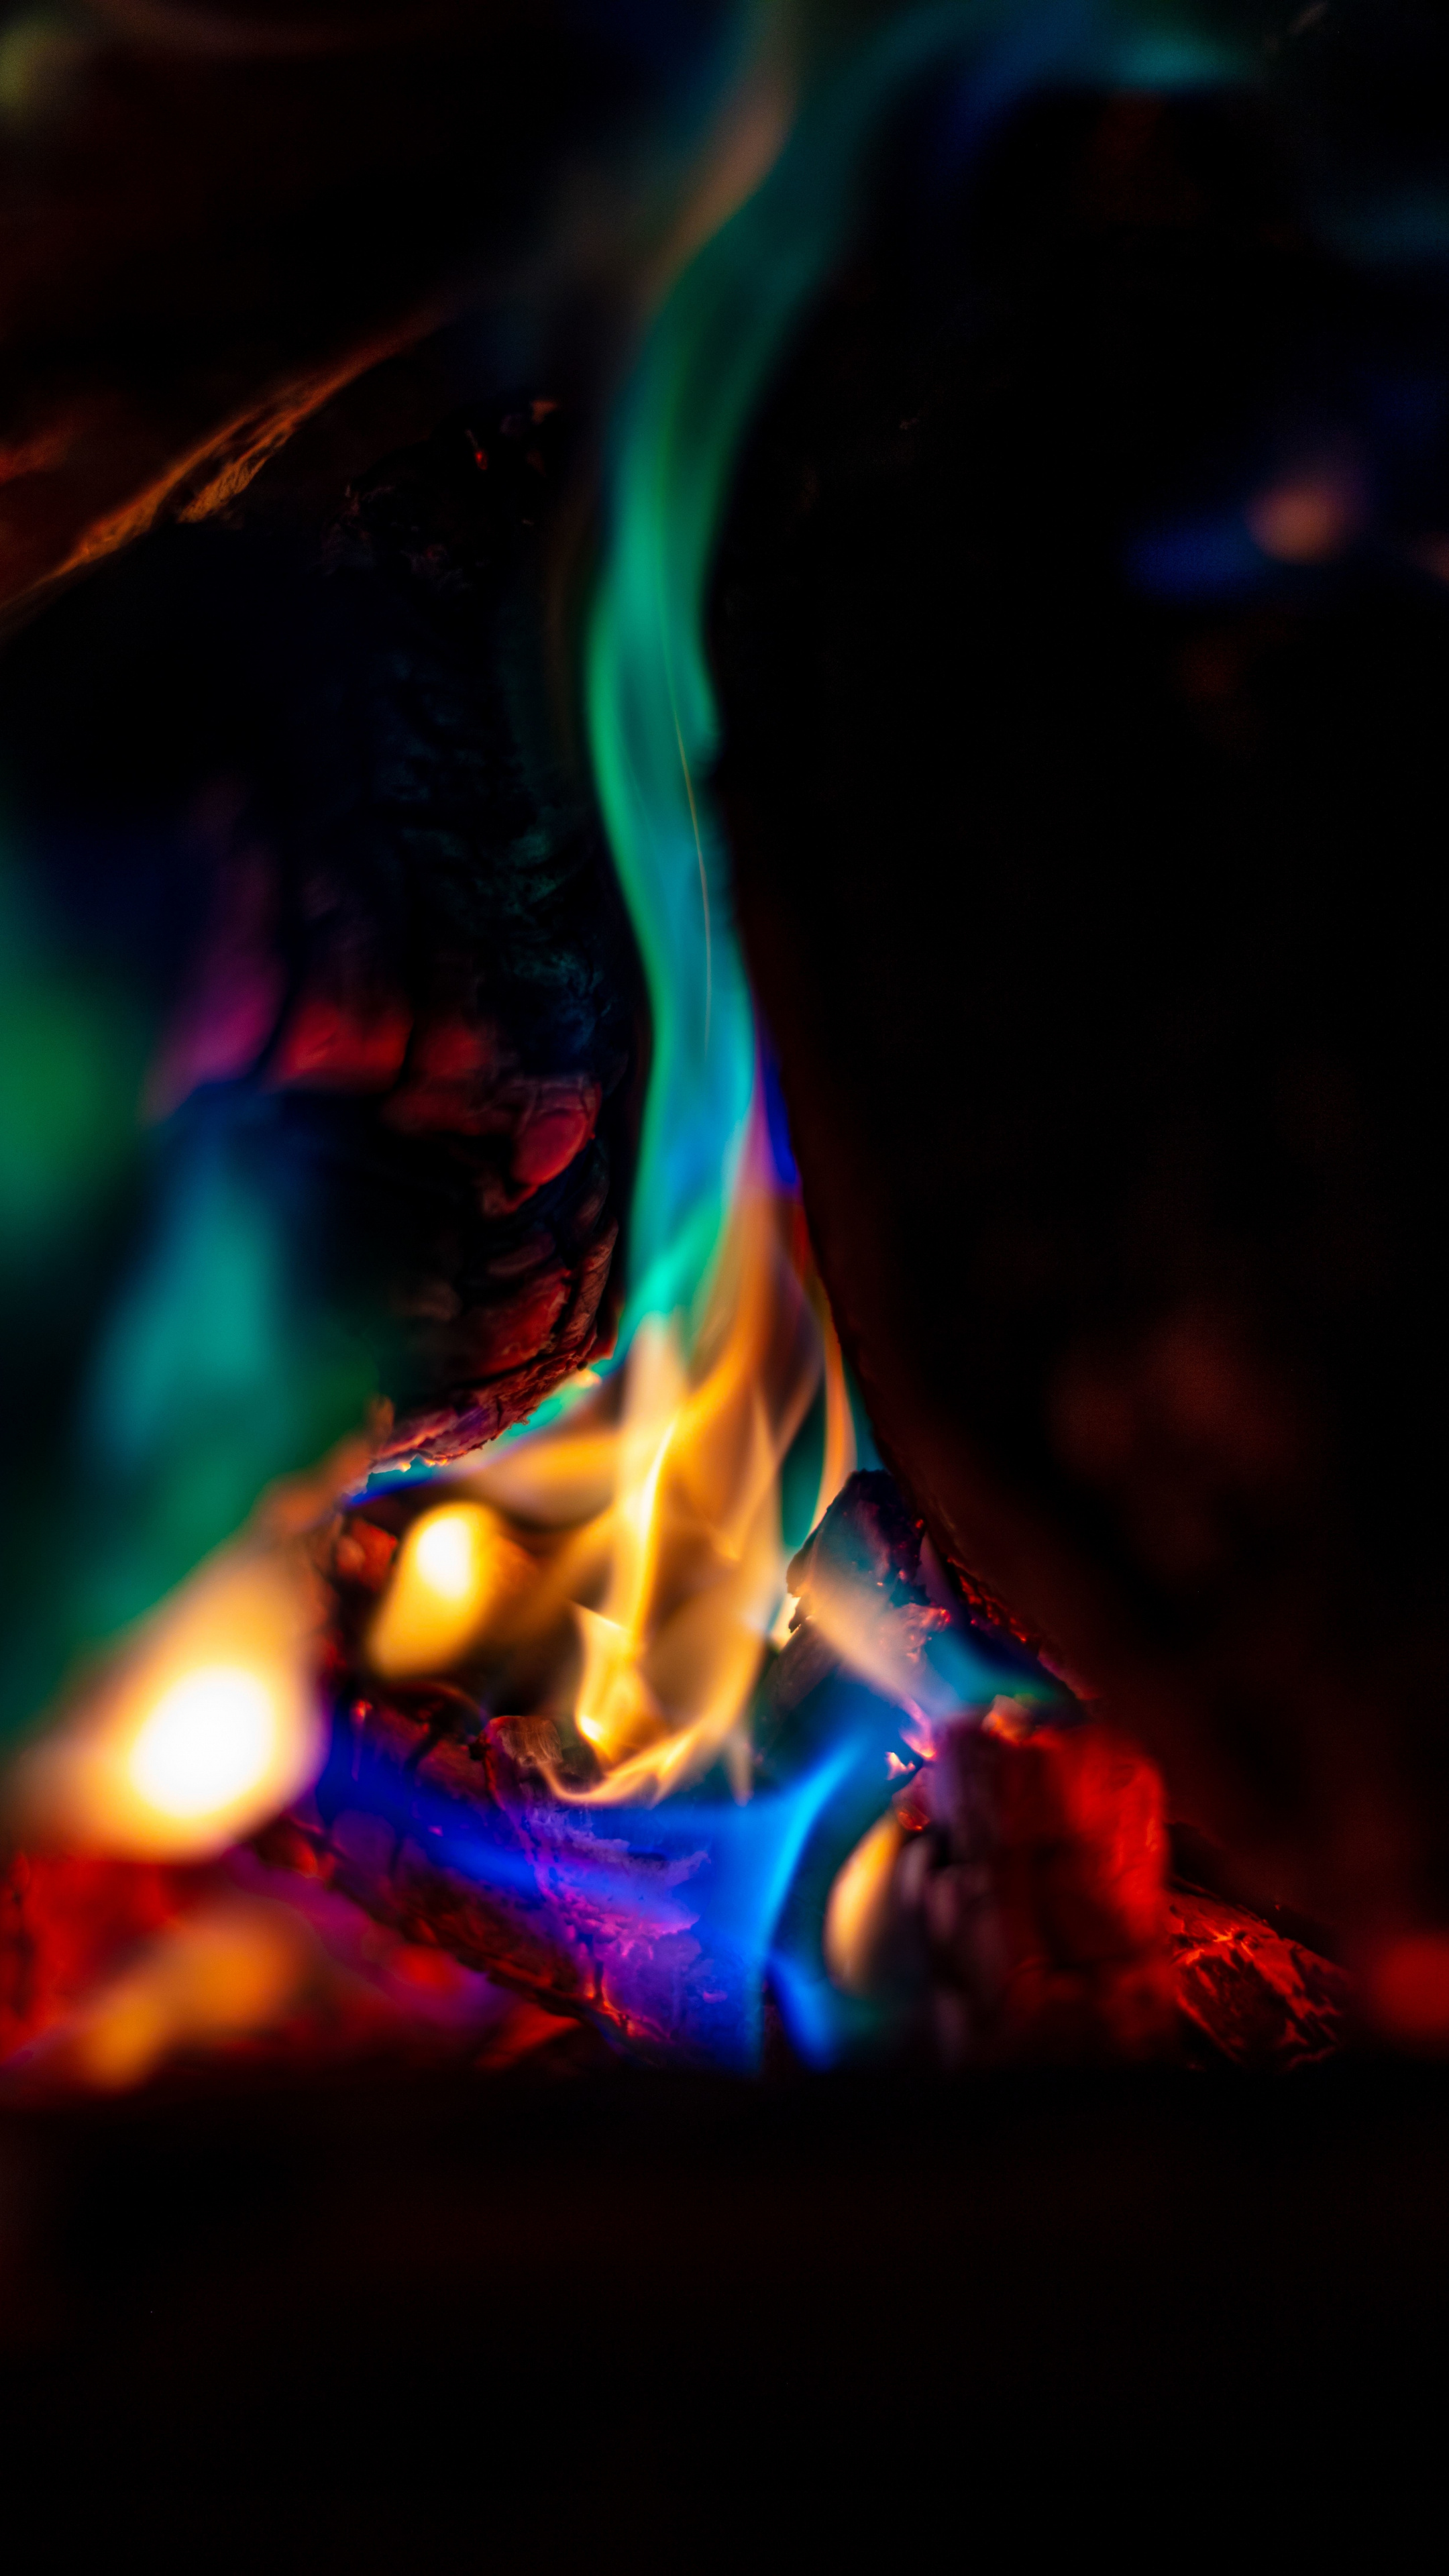 Colorful flame fire wallpapers, Sony Xperia Z5 Premium HD wallpapers, Vivid flame visuals, Flame images, Fire wallpaper backgrounds, 2160x3840 4K Handy